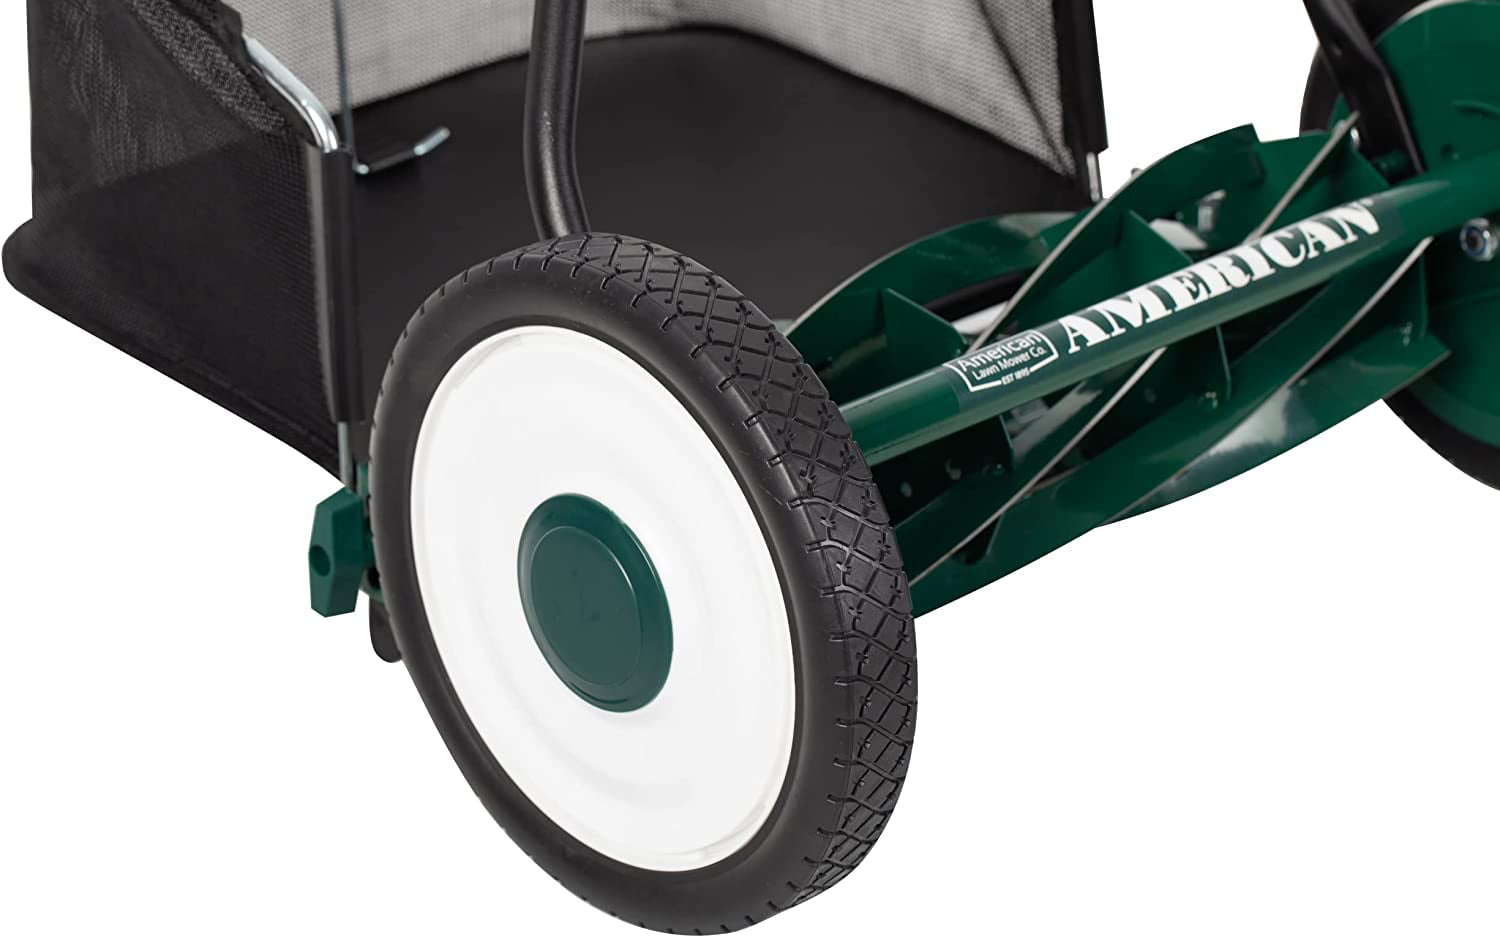 American Lawn Mower Company 1725-16GC 16-inch 7-Blade Reel Mower with Grass  Catcher - BestBuy Mall